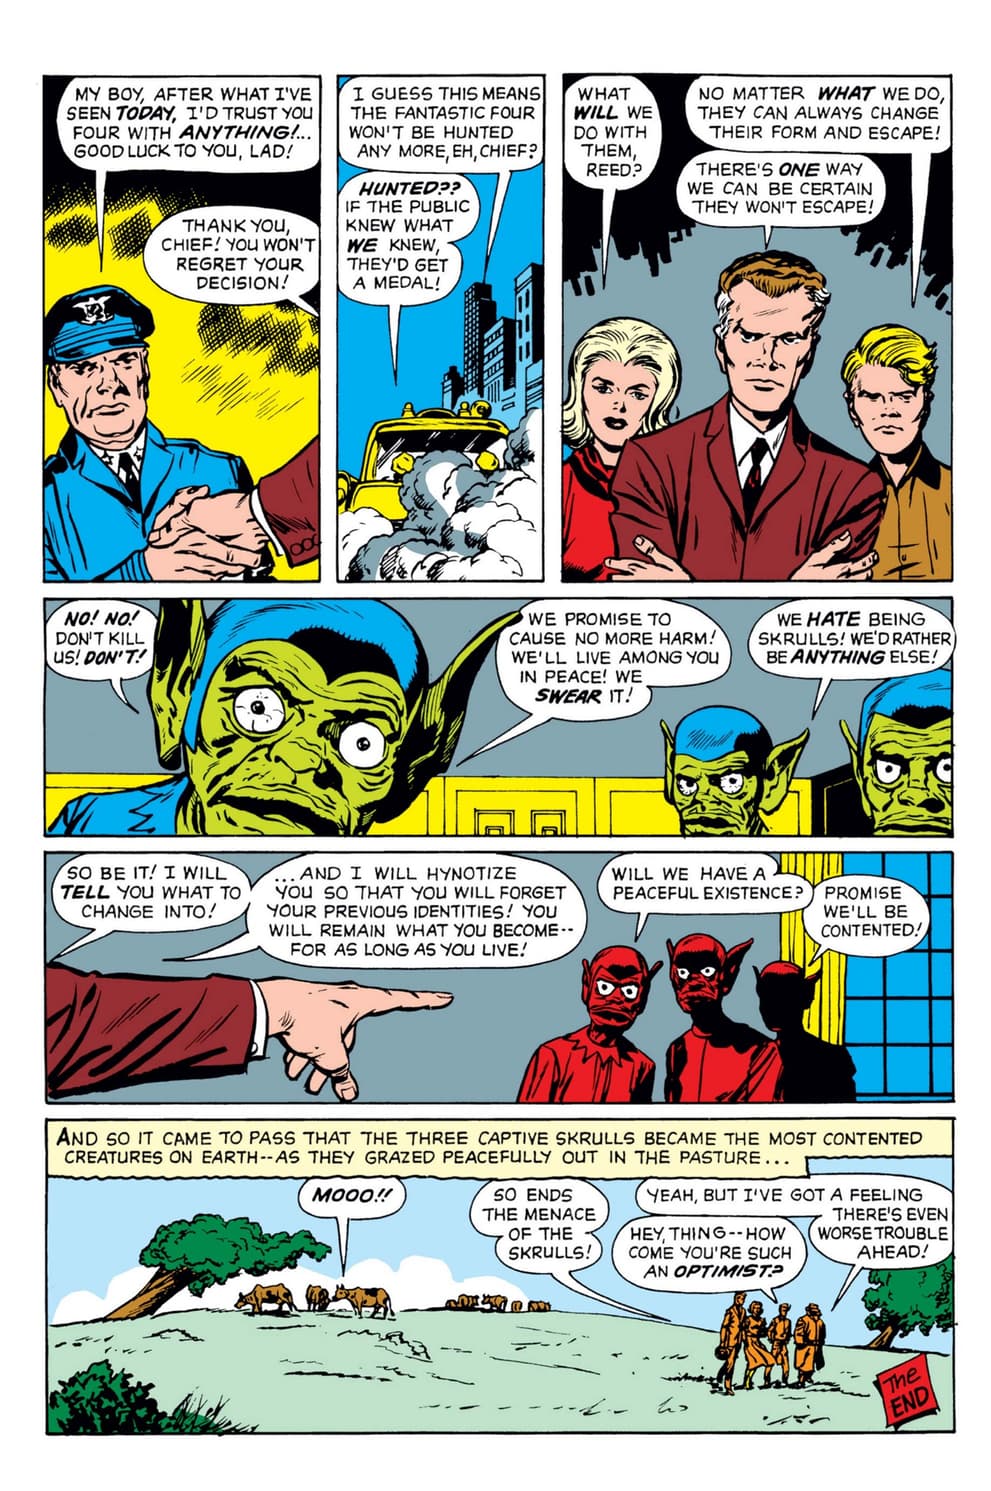 FANTASTIC FOUR (1961) #2 page by Jack Kirby, George Klein, and Stan Goldberg